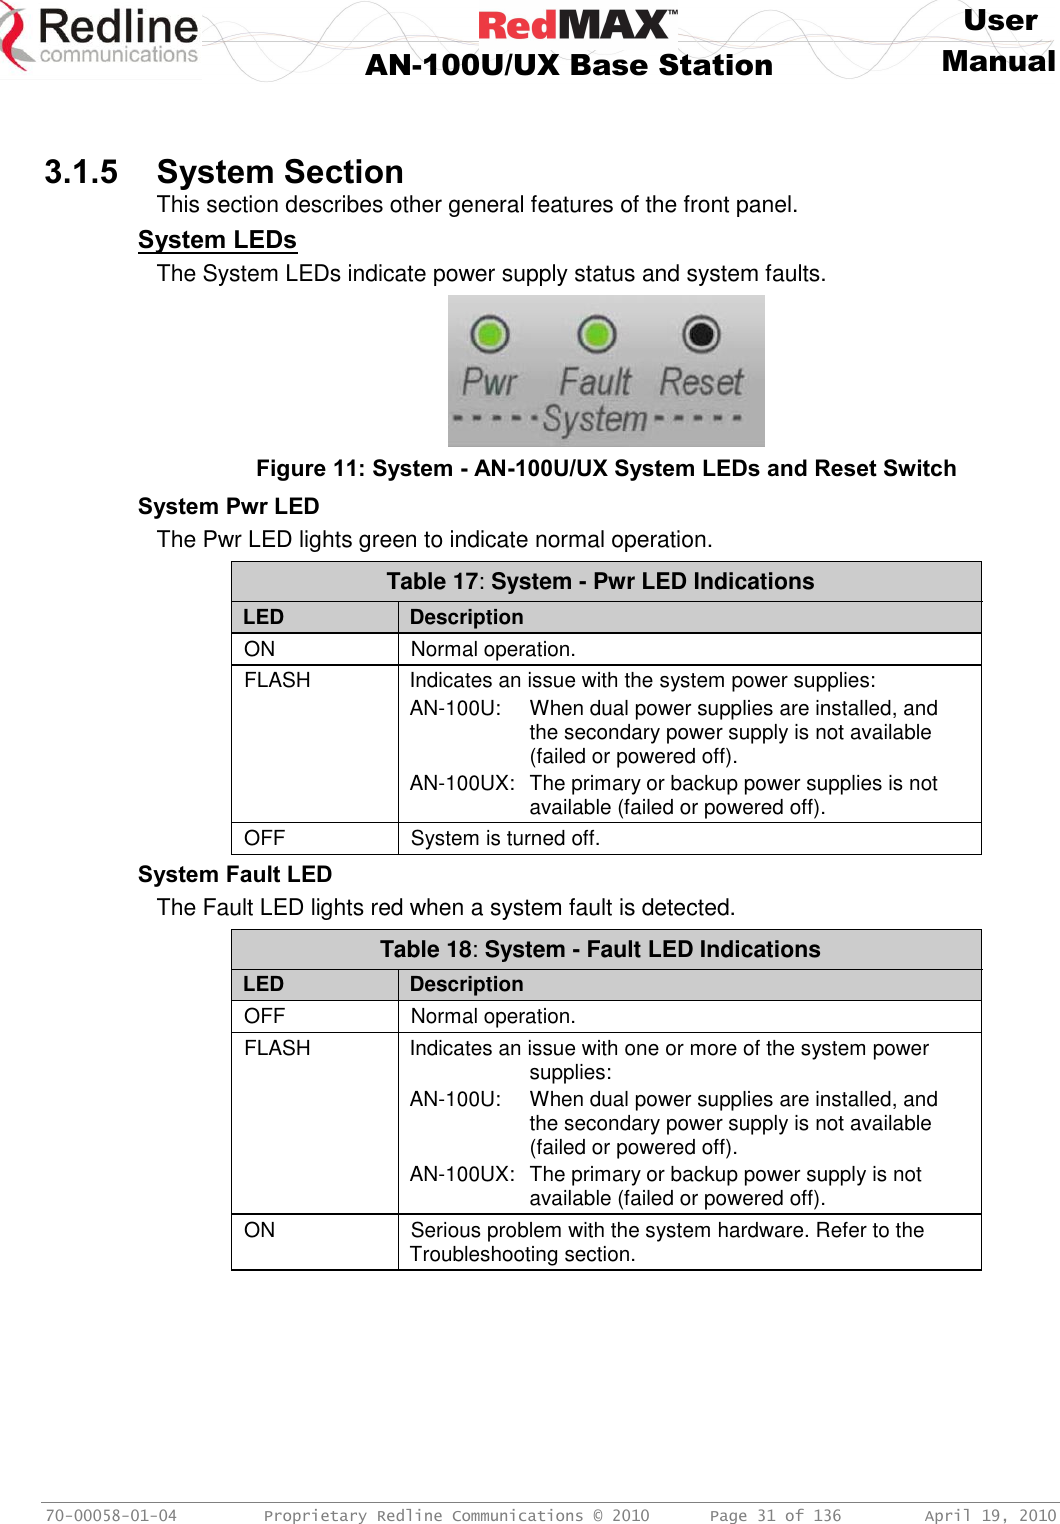     User  AN-100U/UX Base Station Manual   70-00058-01-04  Proprietary Redline Communications © 2010   Page 31 of 136  April 19, 2010   3.1.5 System Section This section describes other general features of the front panel. System LEDs The System LEDs indicate power supply status and system faults.  Figure 11: System - AN-100U/UX System LEDs and Reset Switch System Pwr LED The Pwr LED lights green to indicate normal operation.  Table 17: System - Pwr LED Indications LED Description ON Normal operation. FLASH Indicates an issue with the system power supplies: AN-100U:  When dual power supplies are installed, and the secondary power supply is not available (failed or powered off). AN-100UX:  The primary or backup power supplies is not available (failed or powered off). OFF System is turned off. System Fault LED The Fault LED lights red when a system fault is detected. Table 18: System - Fault LED Indications LED Description OFF Normal operation. FLASH Indicates an issue with one or more of the system power supplies: AN-100U:  When dual power supplies are installed, and the secondary power supply is not available (failed or powered off). AN-100UX:  The primary or backup power supply is not available (failed or powered off). ON Serious problem with the system hardware. Refer to the Troubleshooting section.   